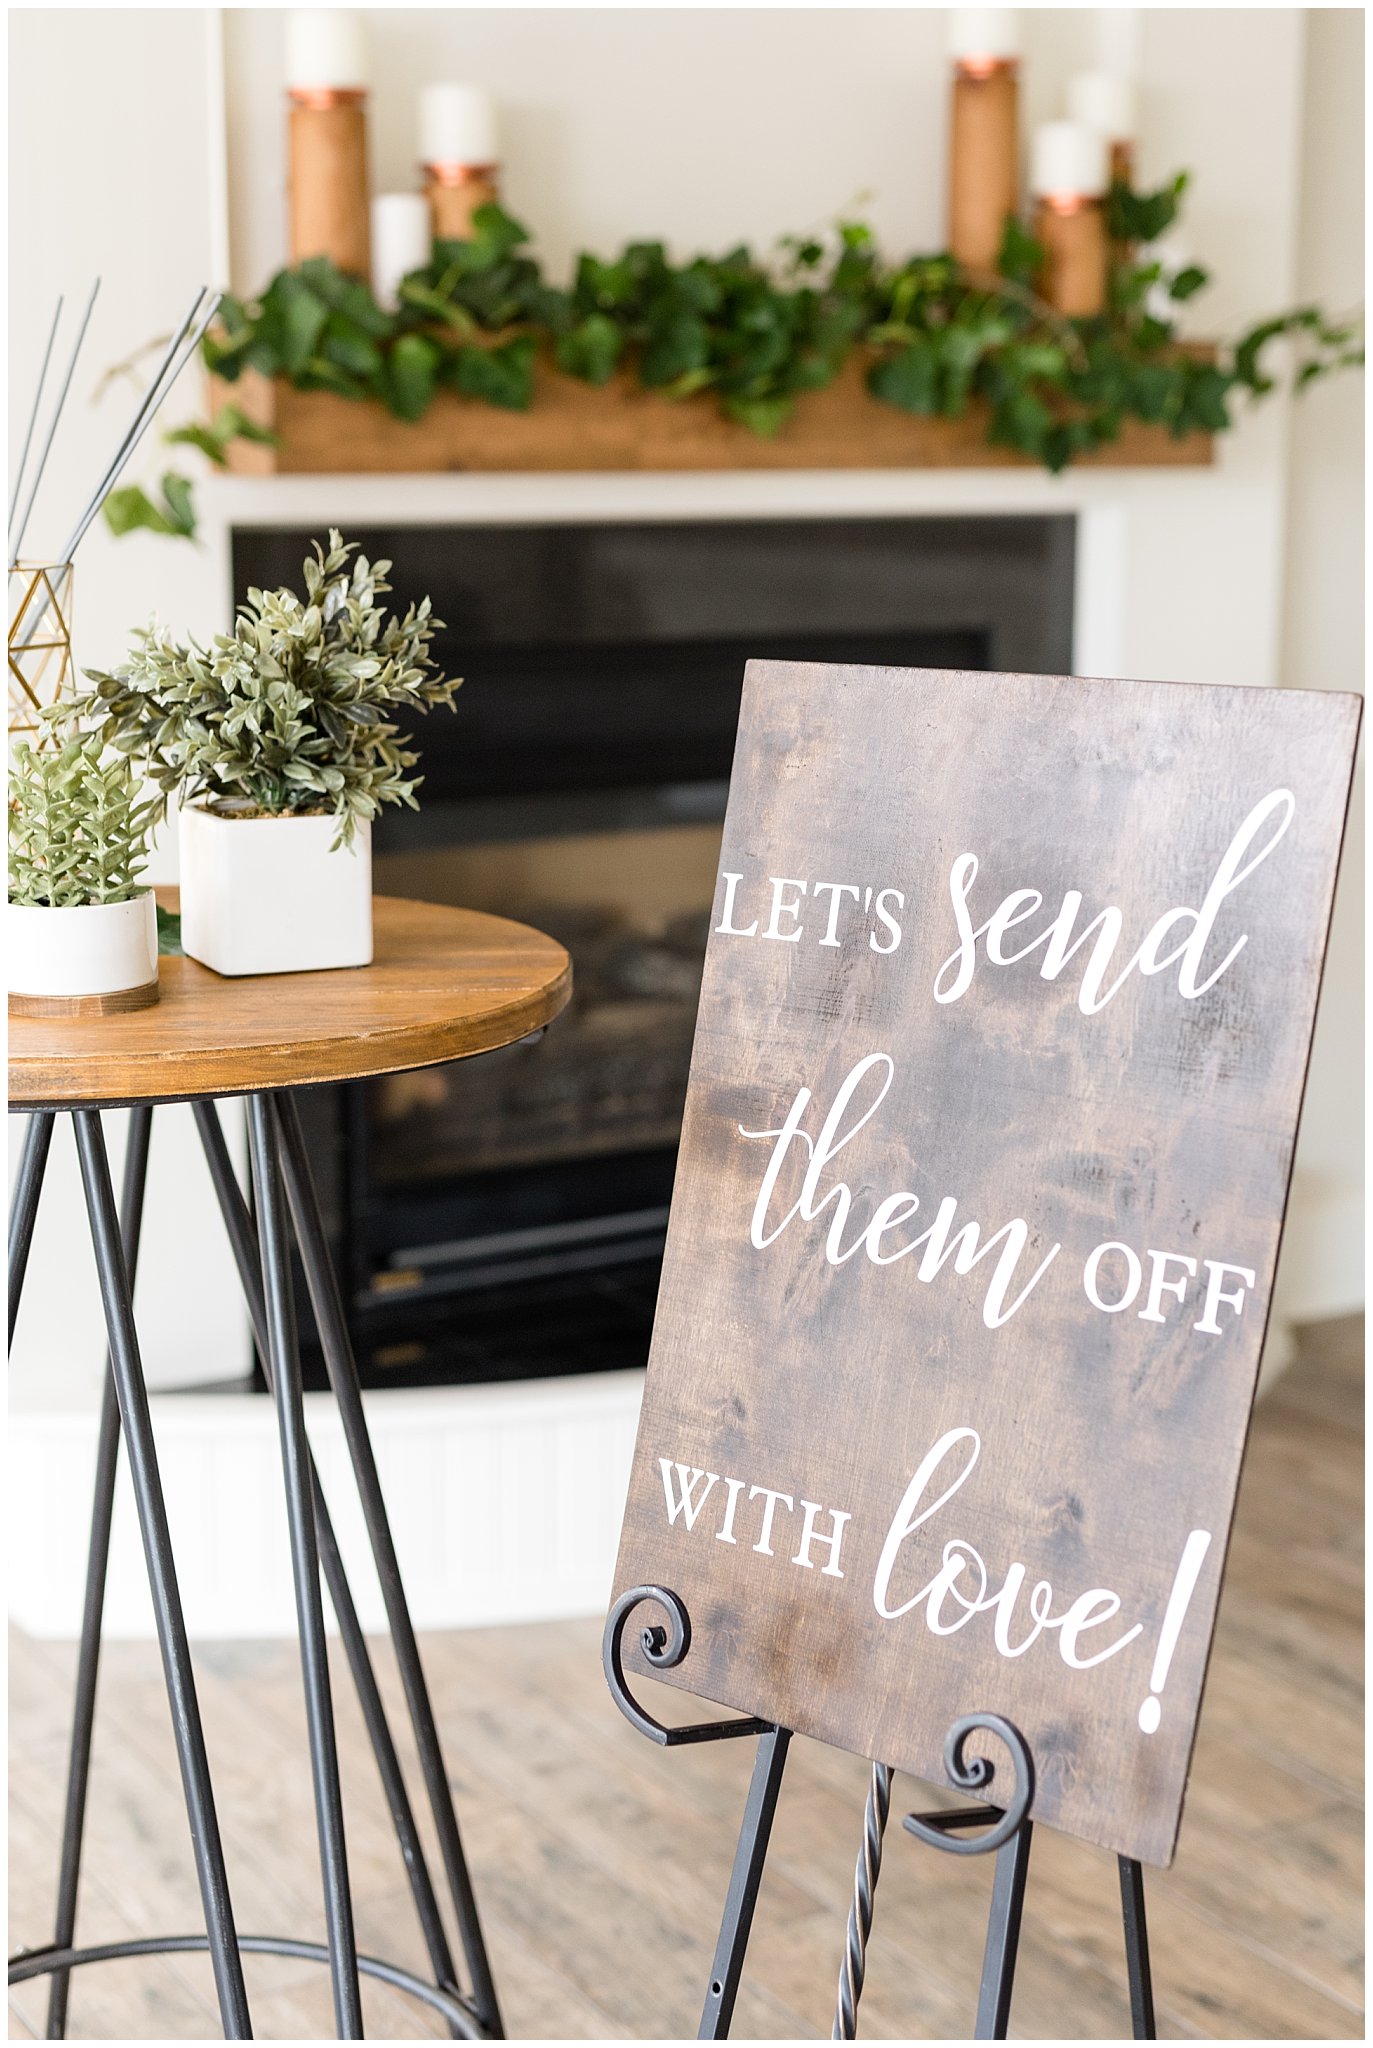 Sparkler exit send them off with love wood sign | 5 Tips for a Flawless Sparkler Exit | Utah Wedding Photographers | Jessie and Dallin Photography